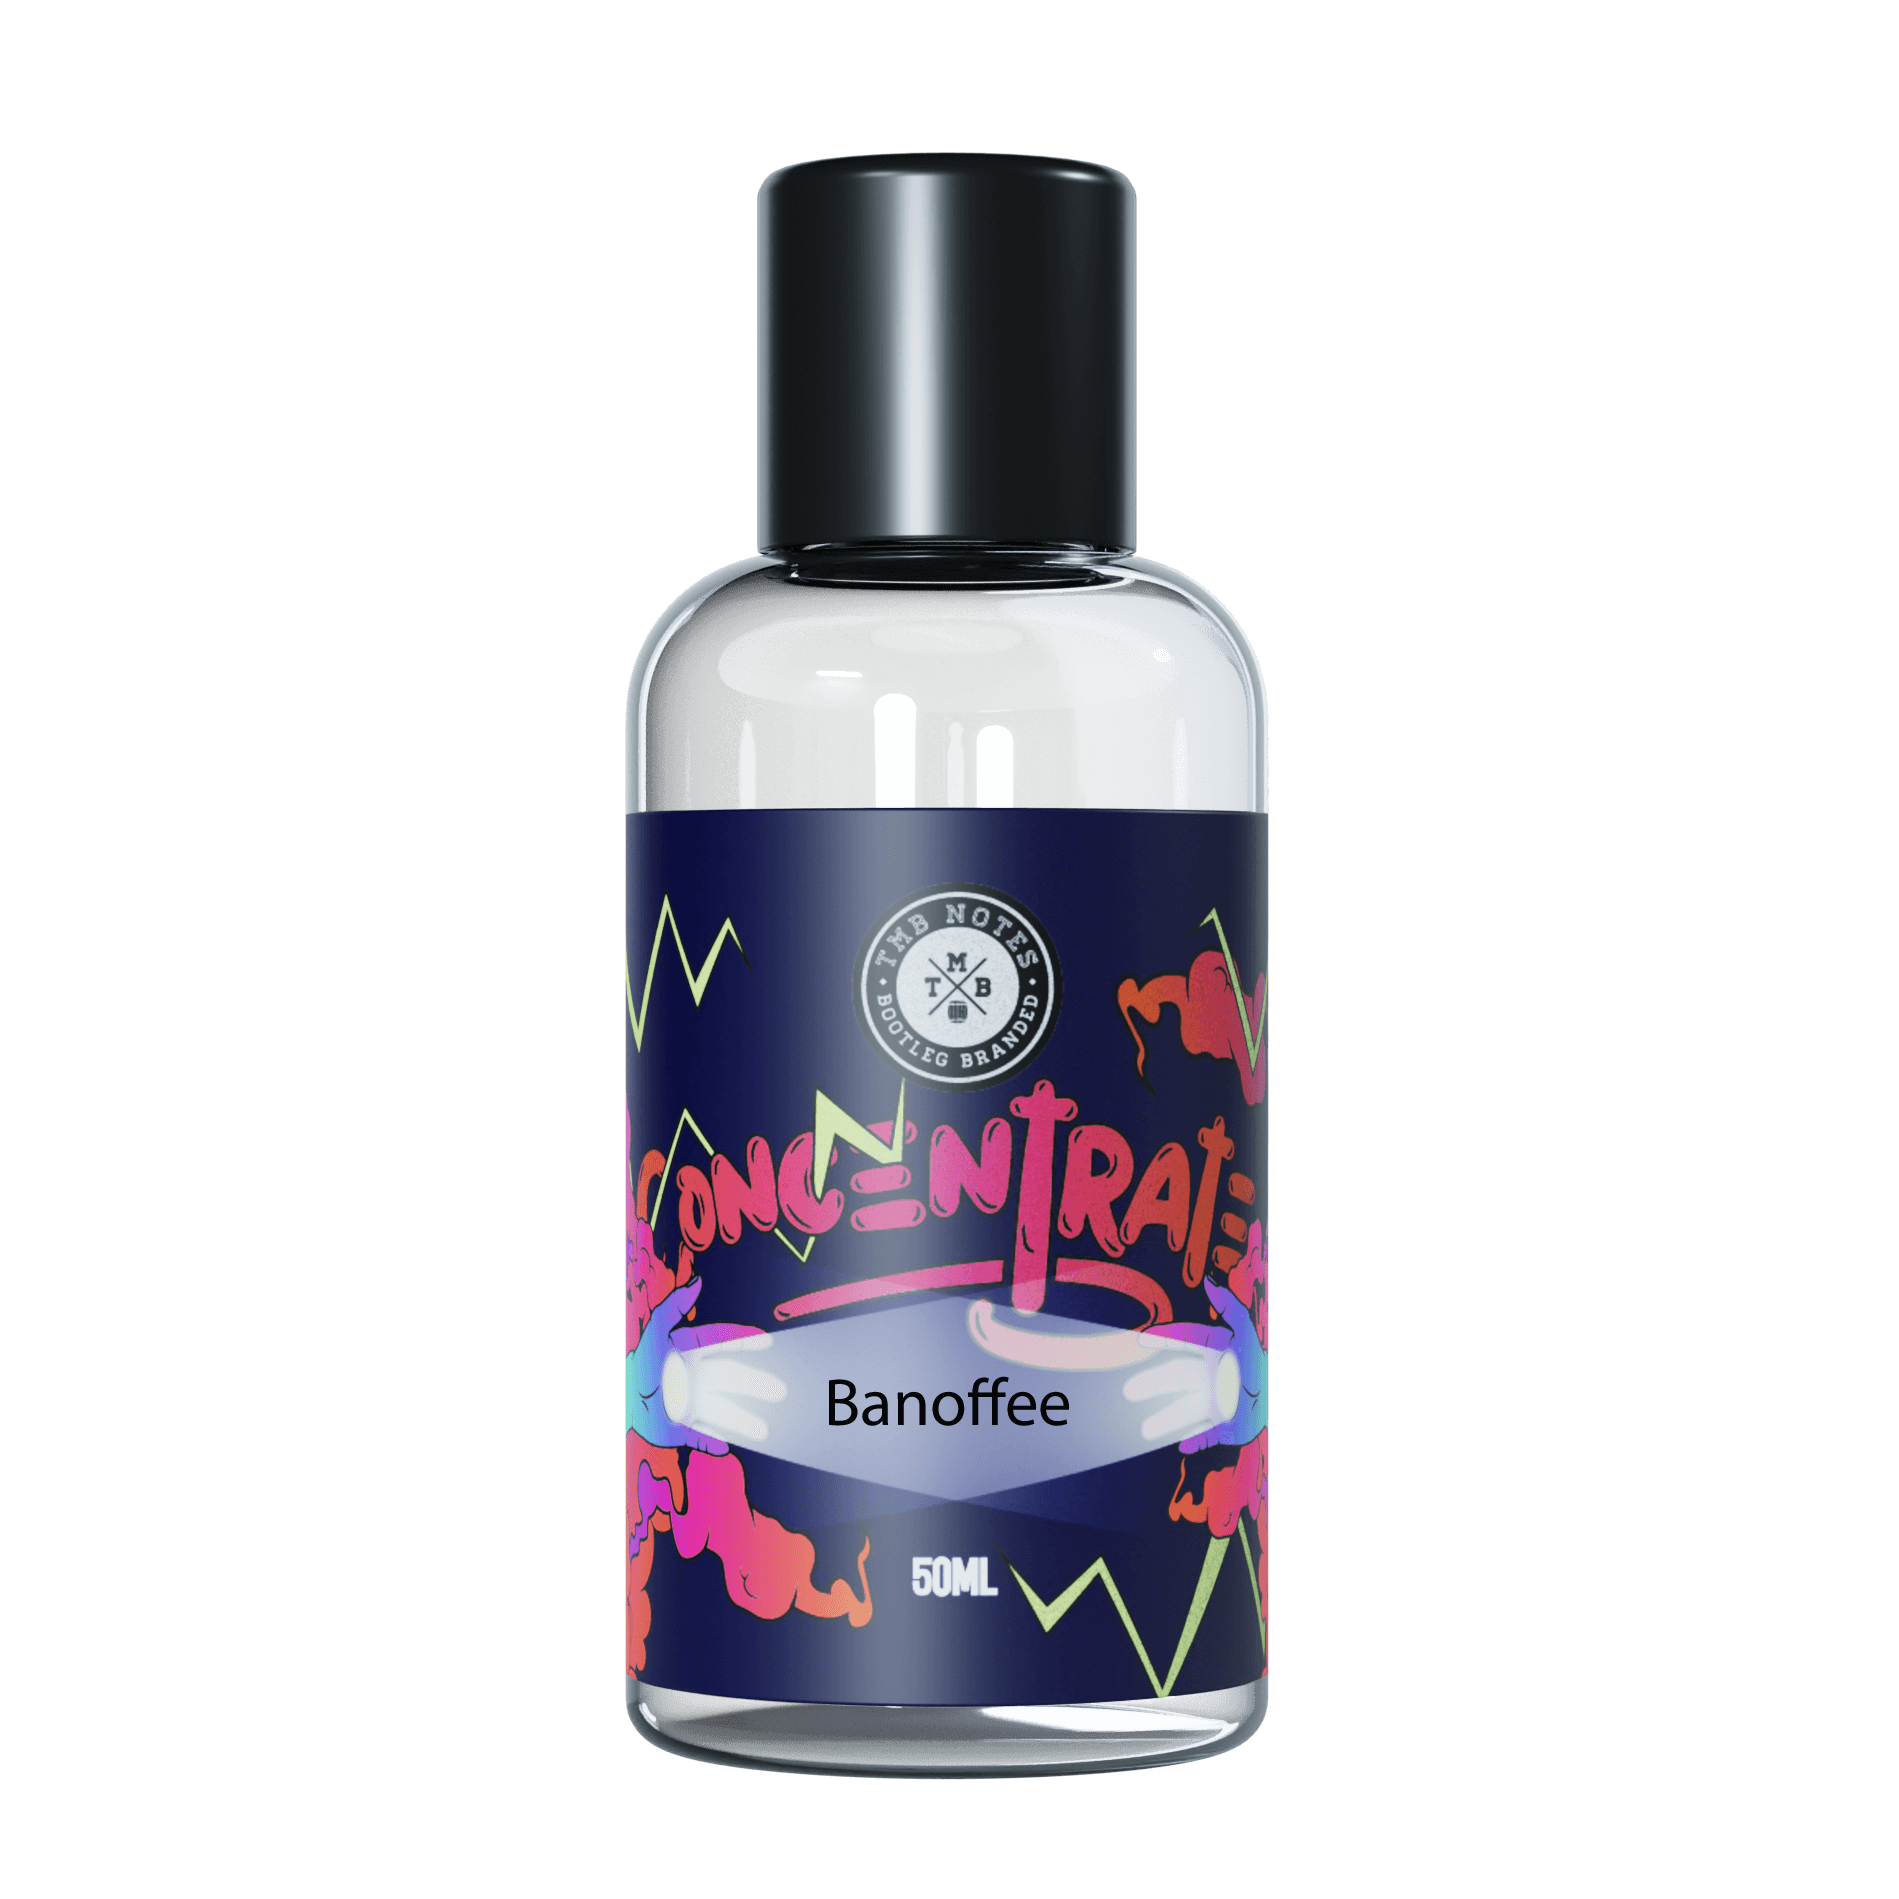 Banoffee E liquid Flavour Concentrate